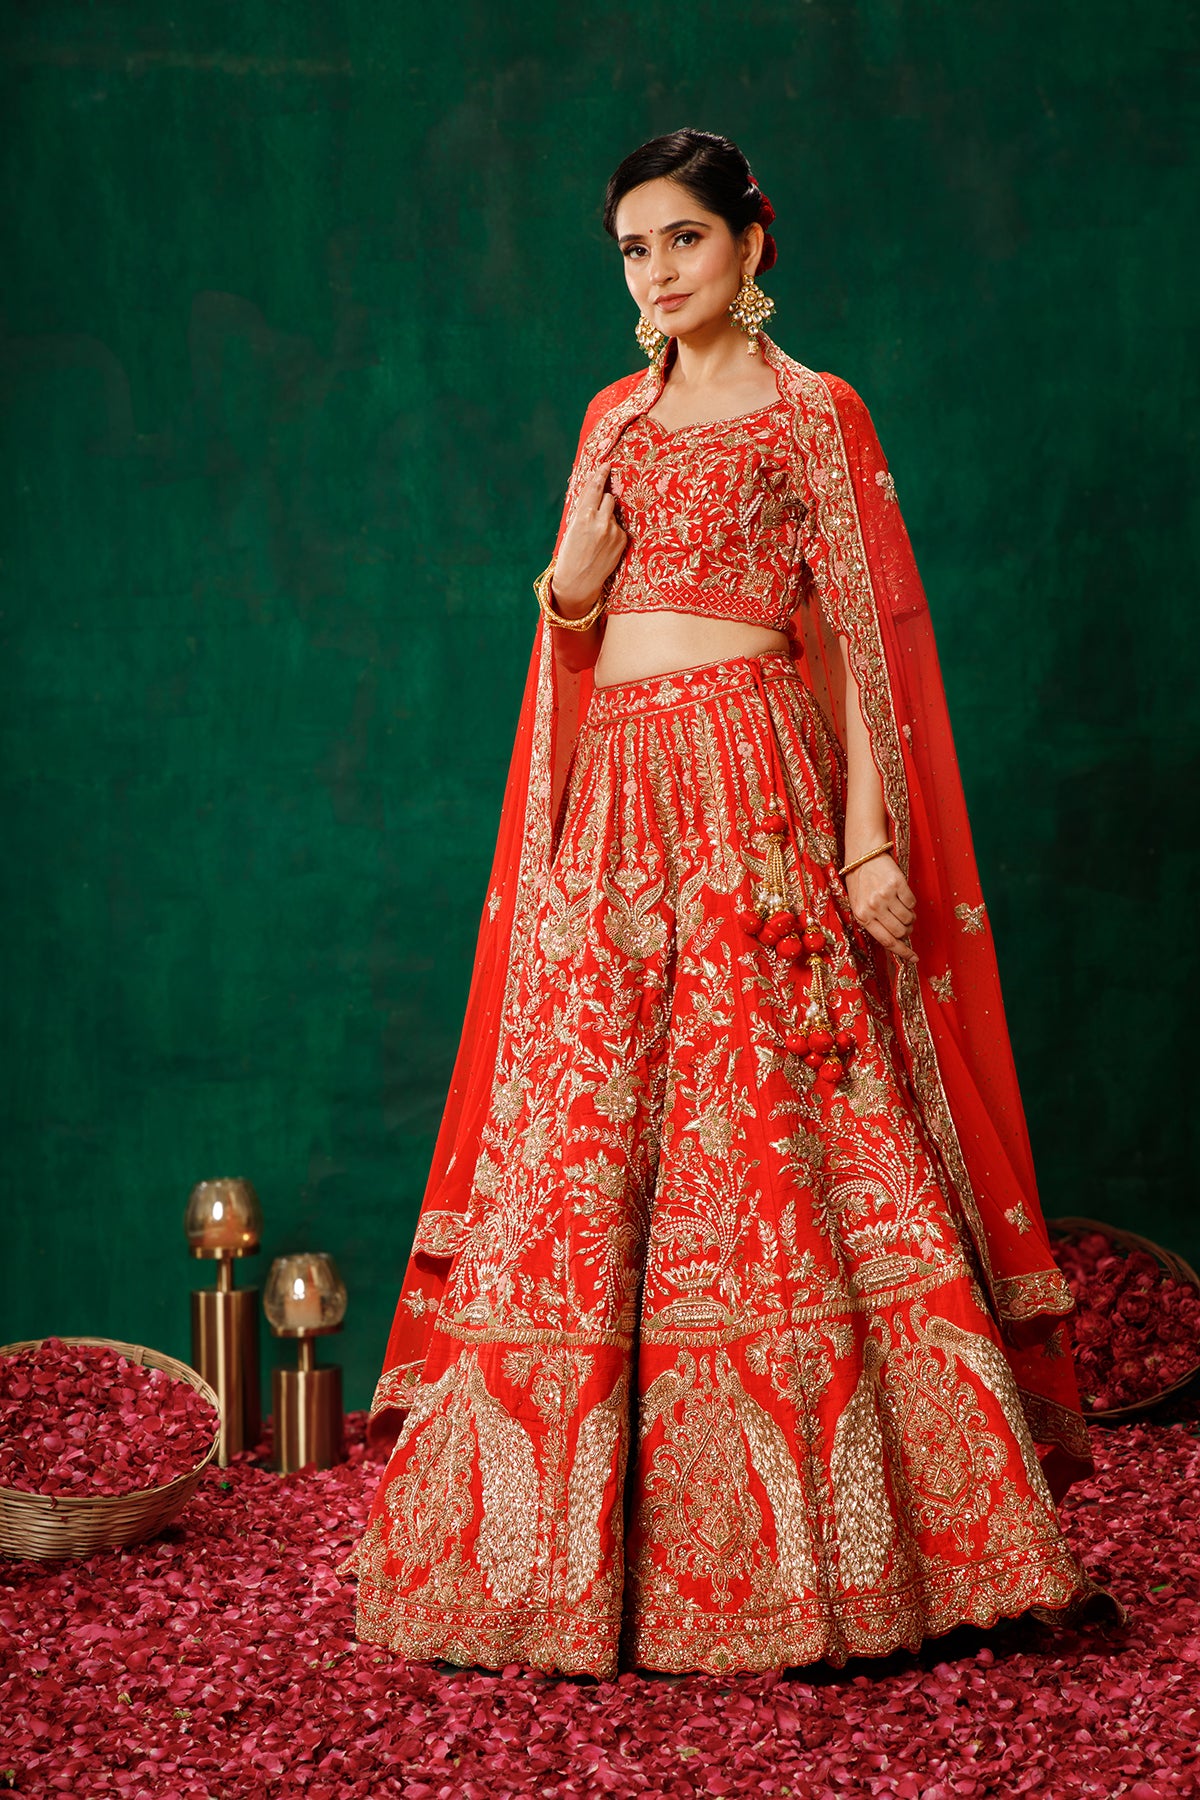 I always knew that I wanted to be a quintessential red bride. I went with a blood  red lehenga with gold embroidery and embellishments. I… | Instagram